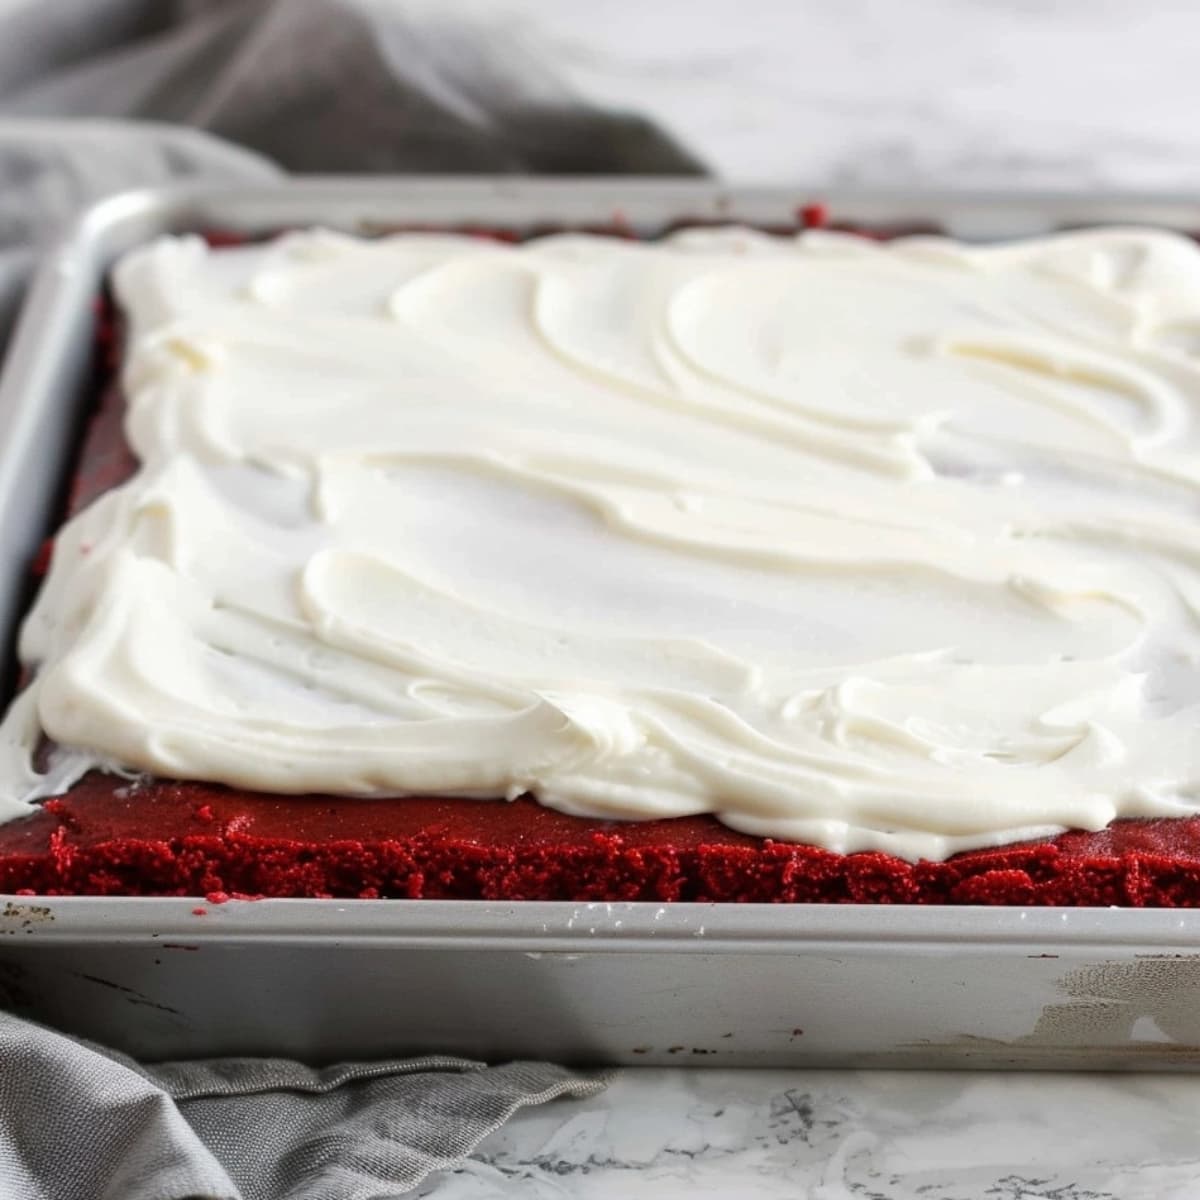 Red velvet sheet cake with spread of frosting on top.